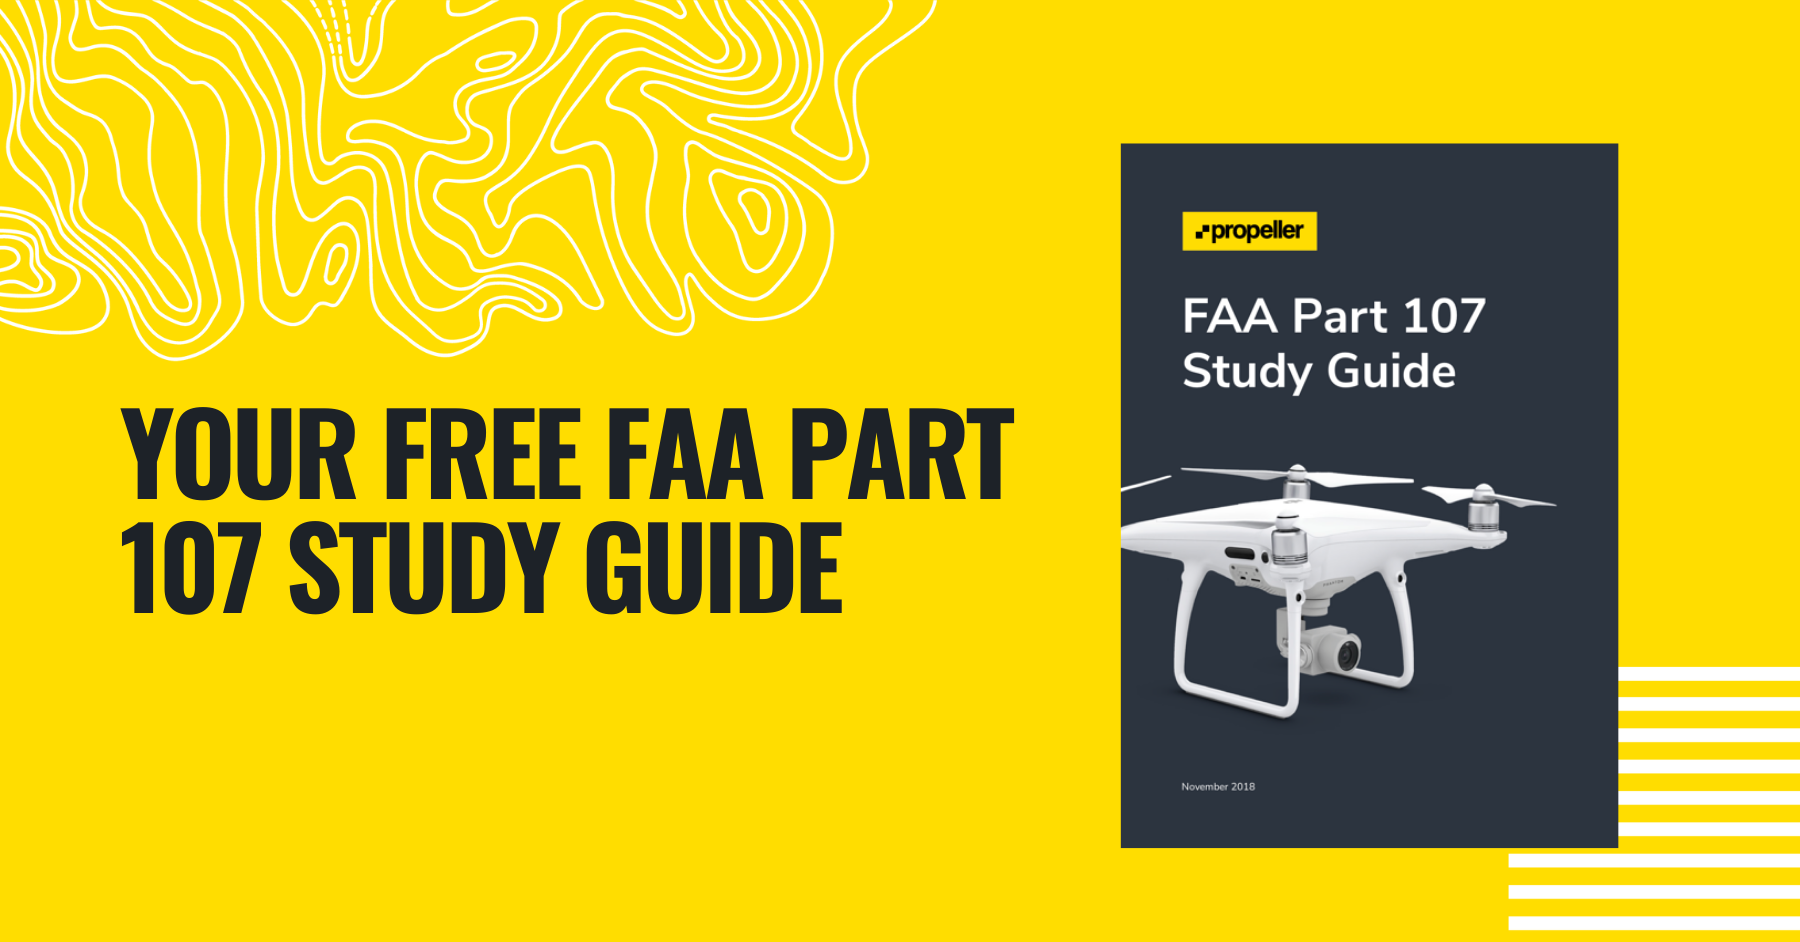 Download Your Free FAA Part 107 Study Guide